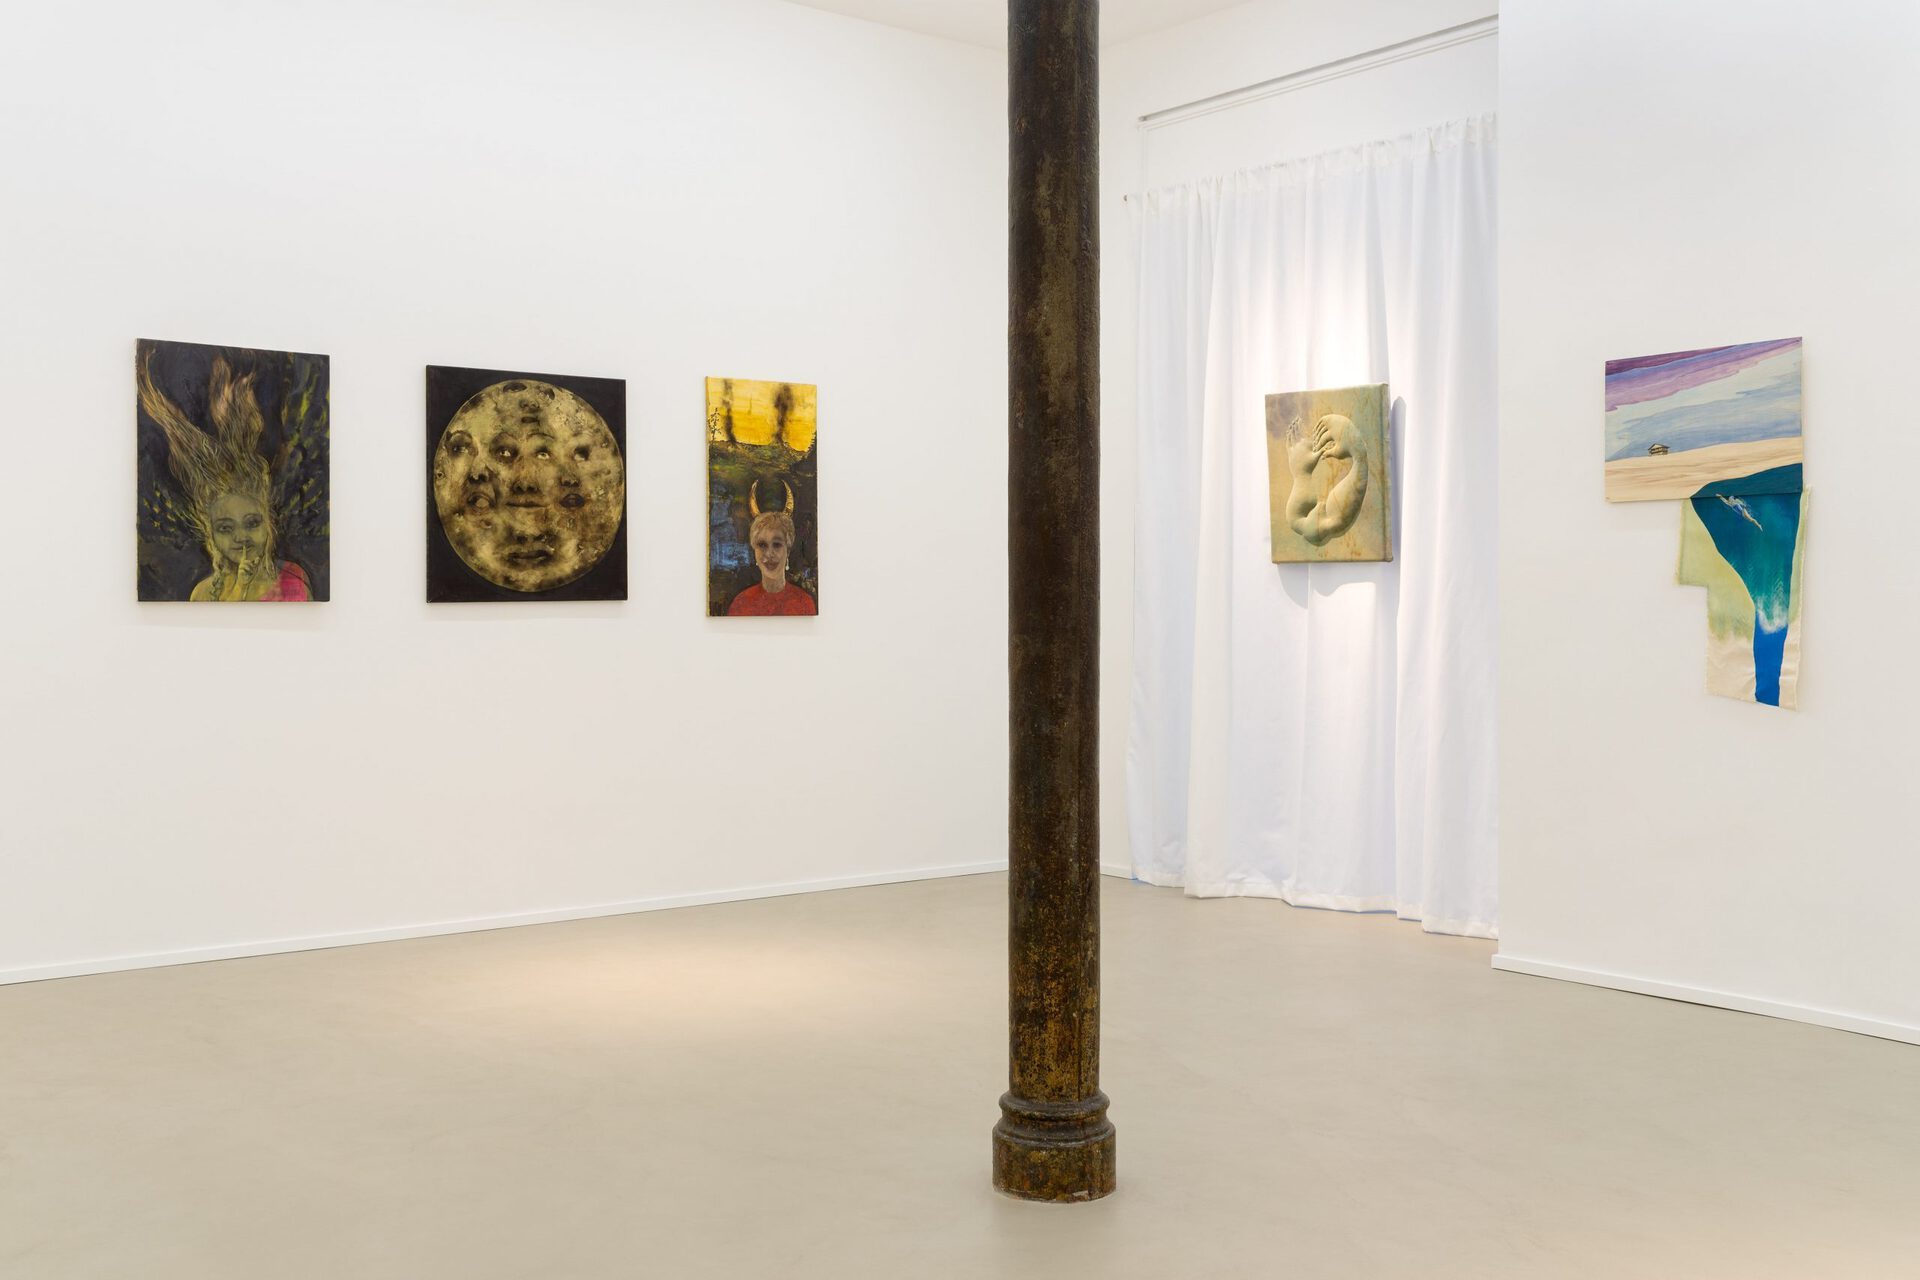 Installation view 2, Feral Signals, Milan, 2021, courtesy of the artists and eastcontemporary